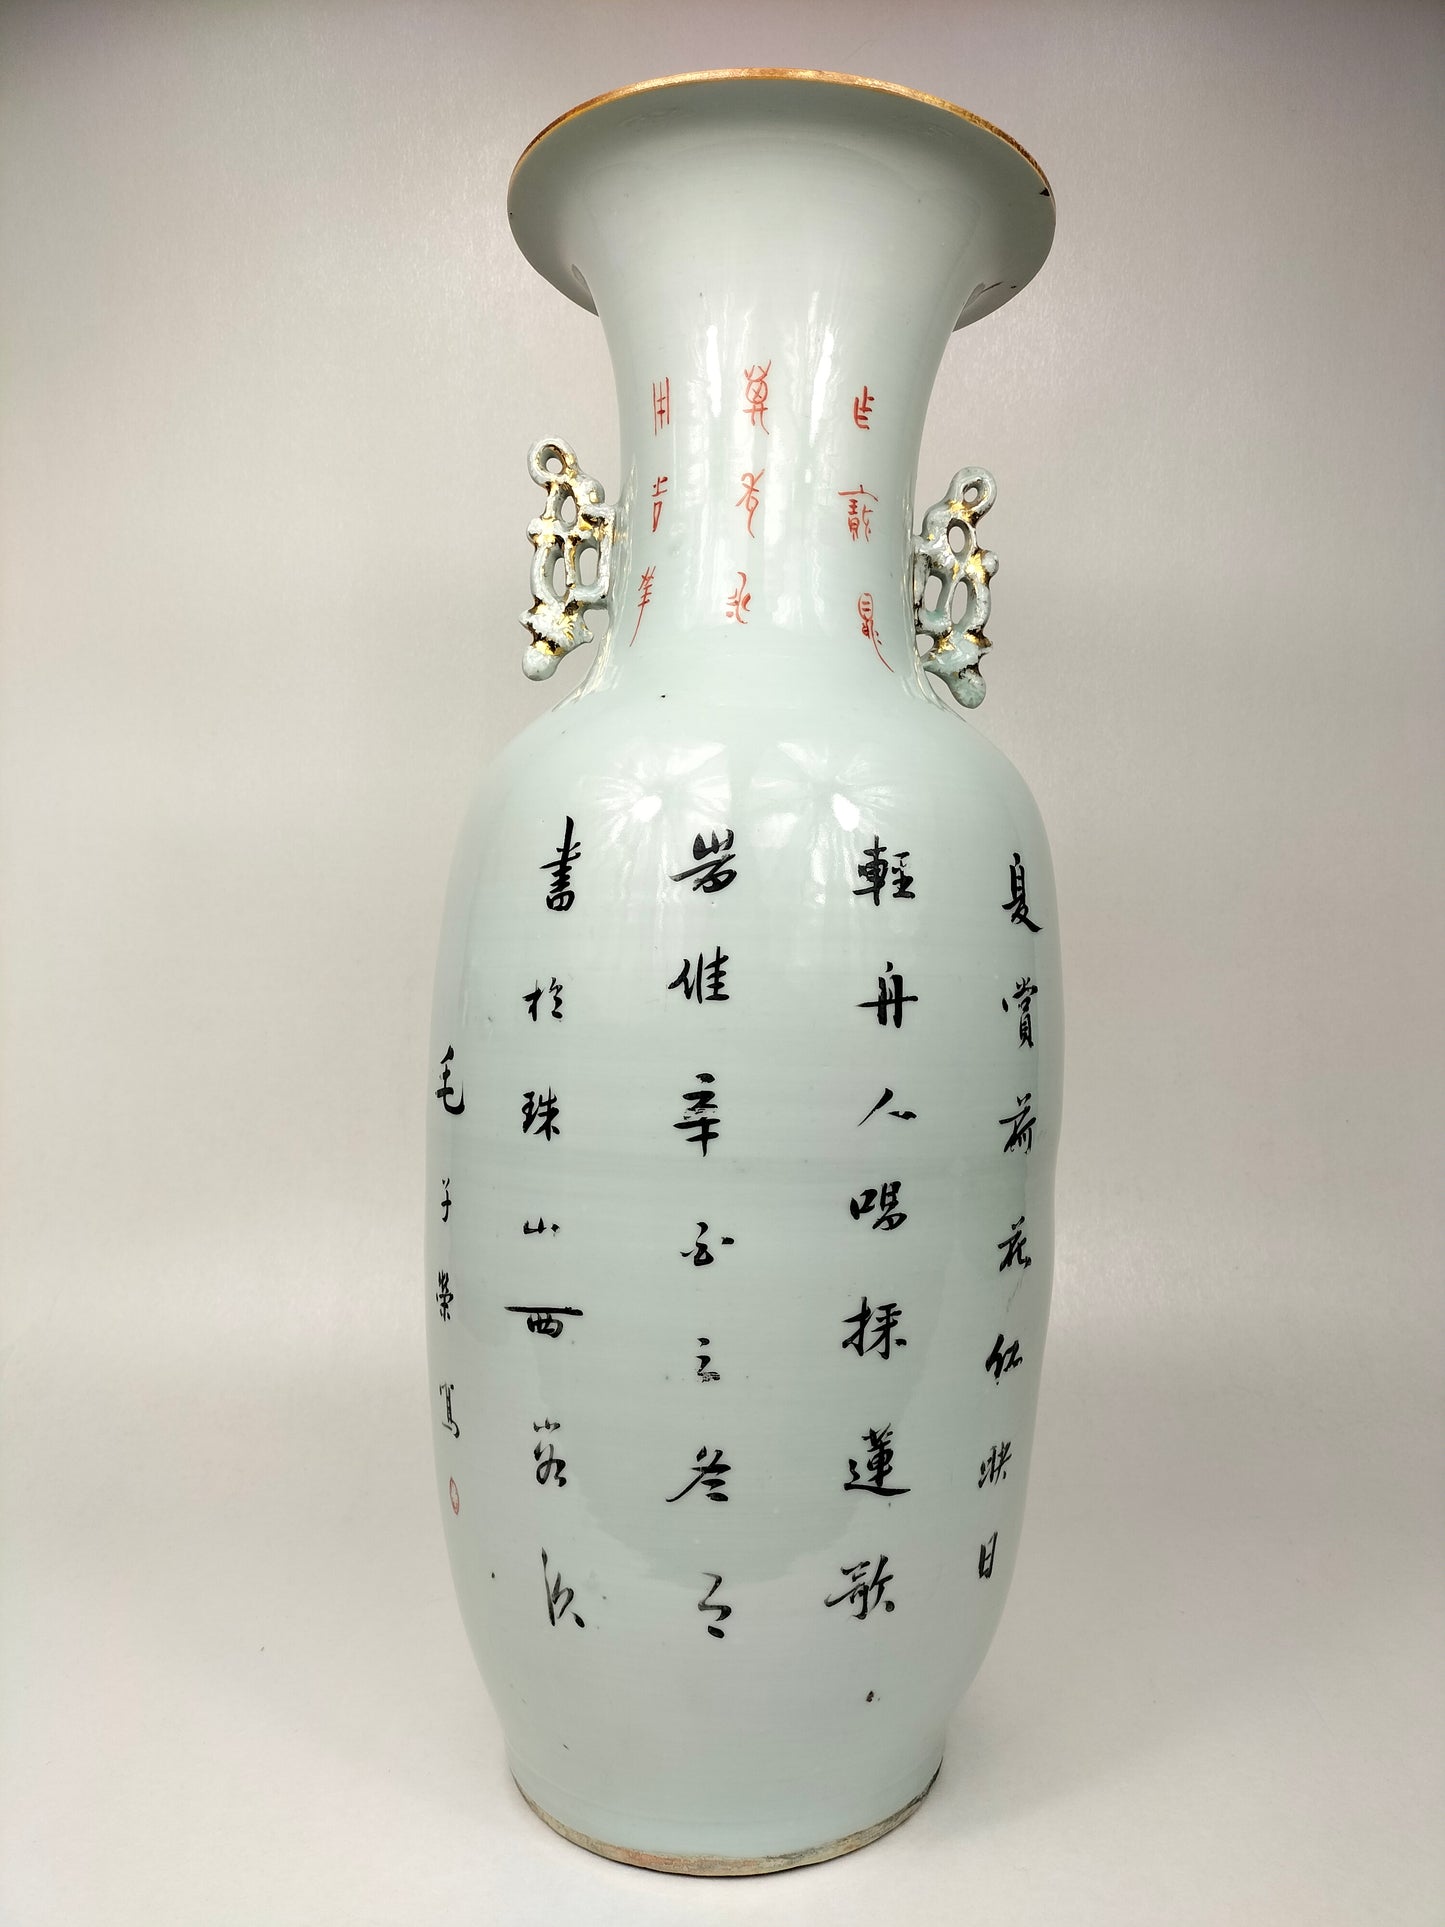 Large antique Chinese vase decorated with an Imperial scene // Republic Period (1912-1949)